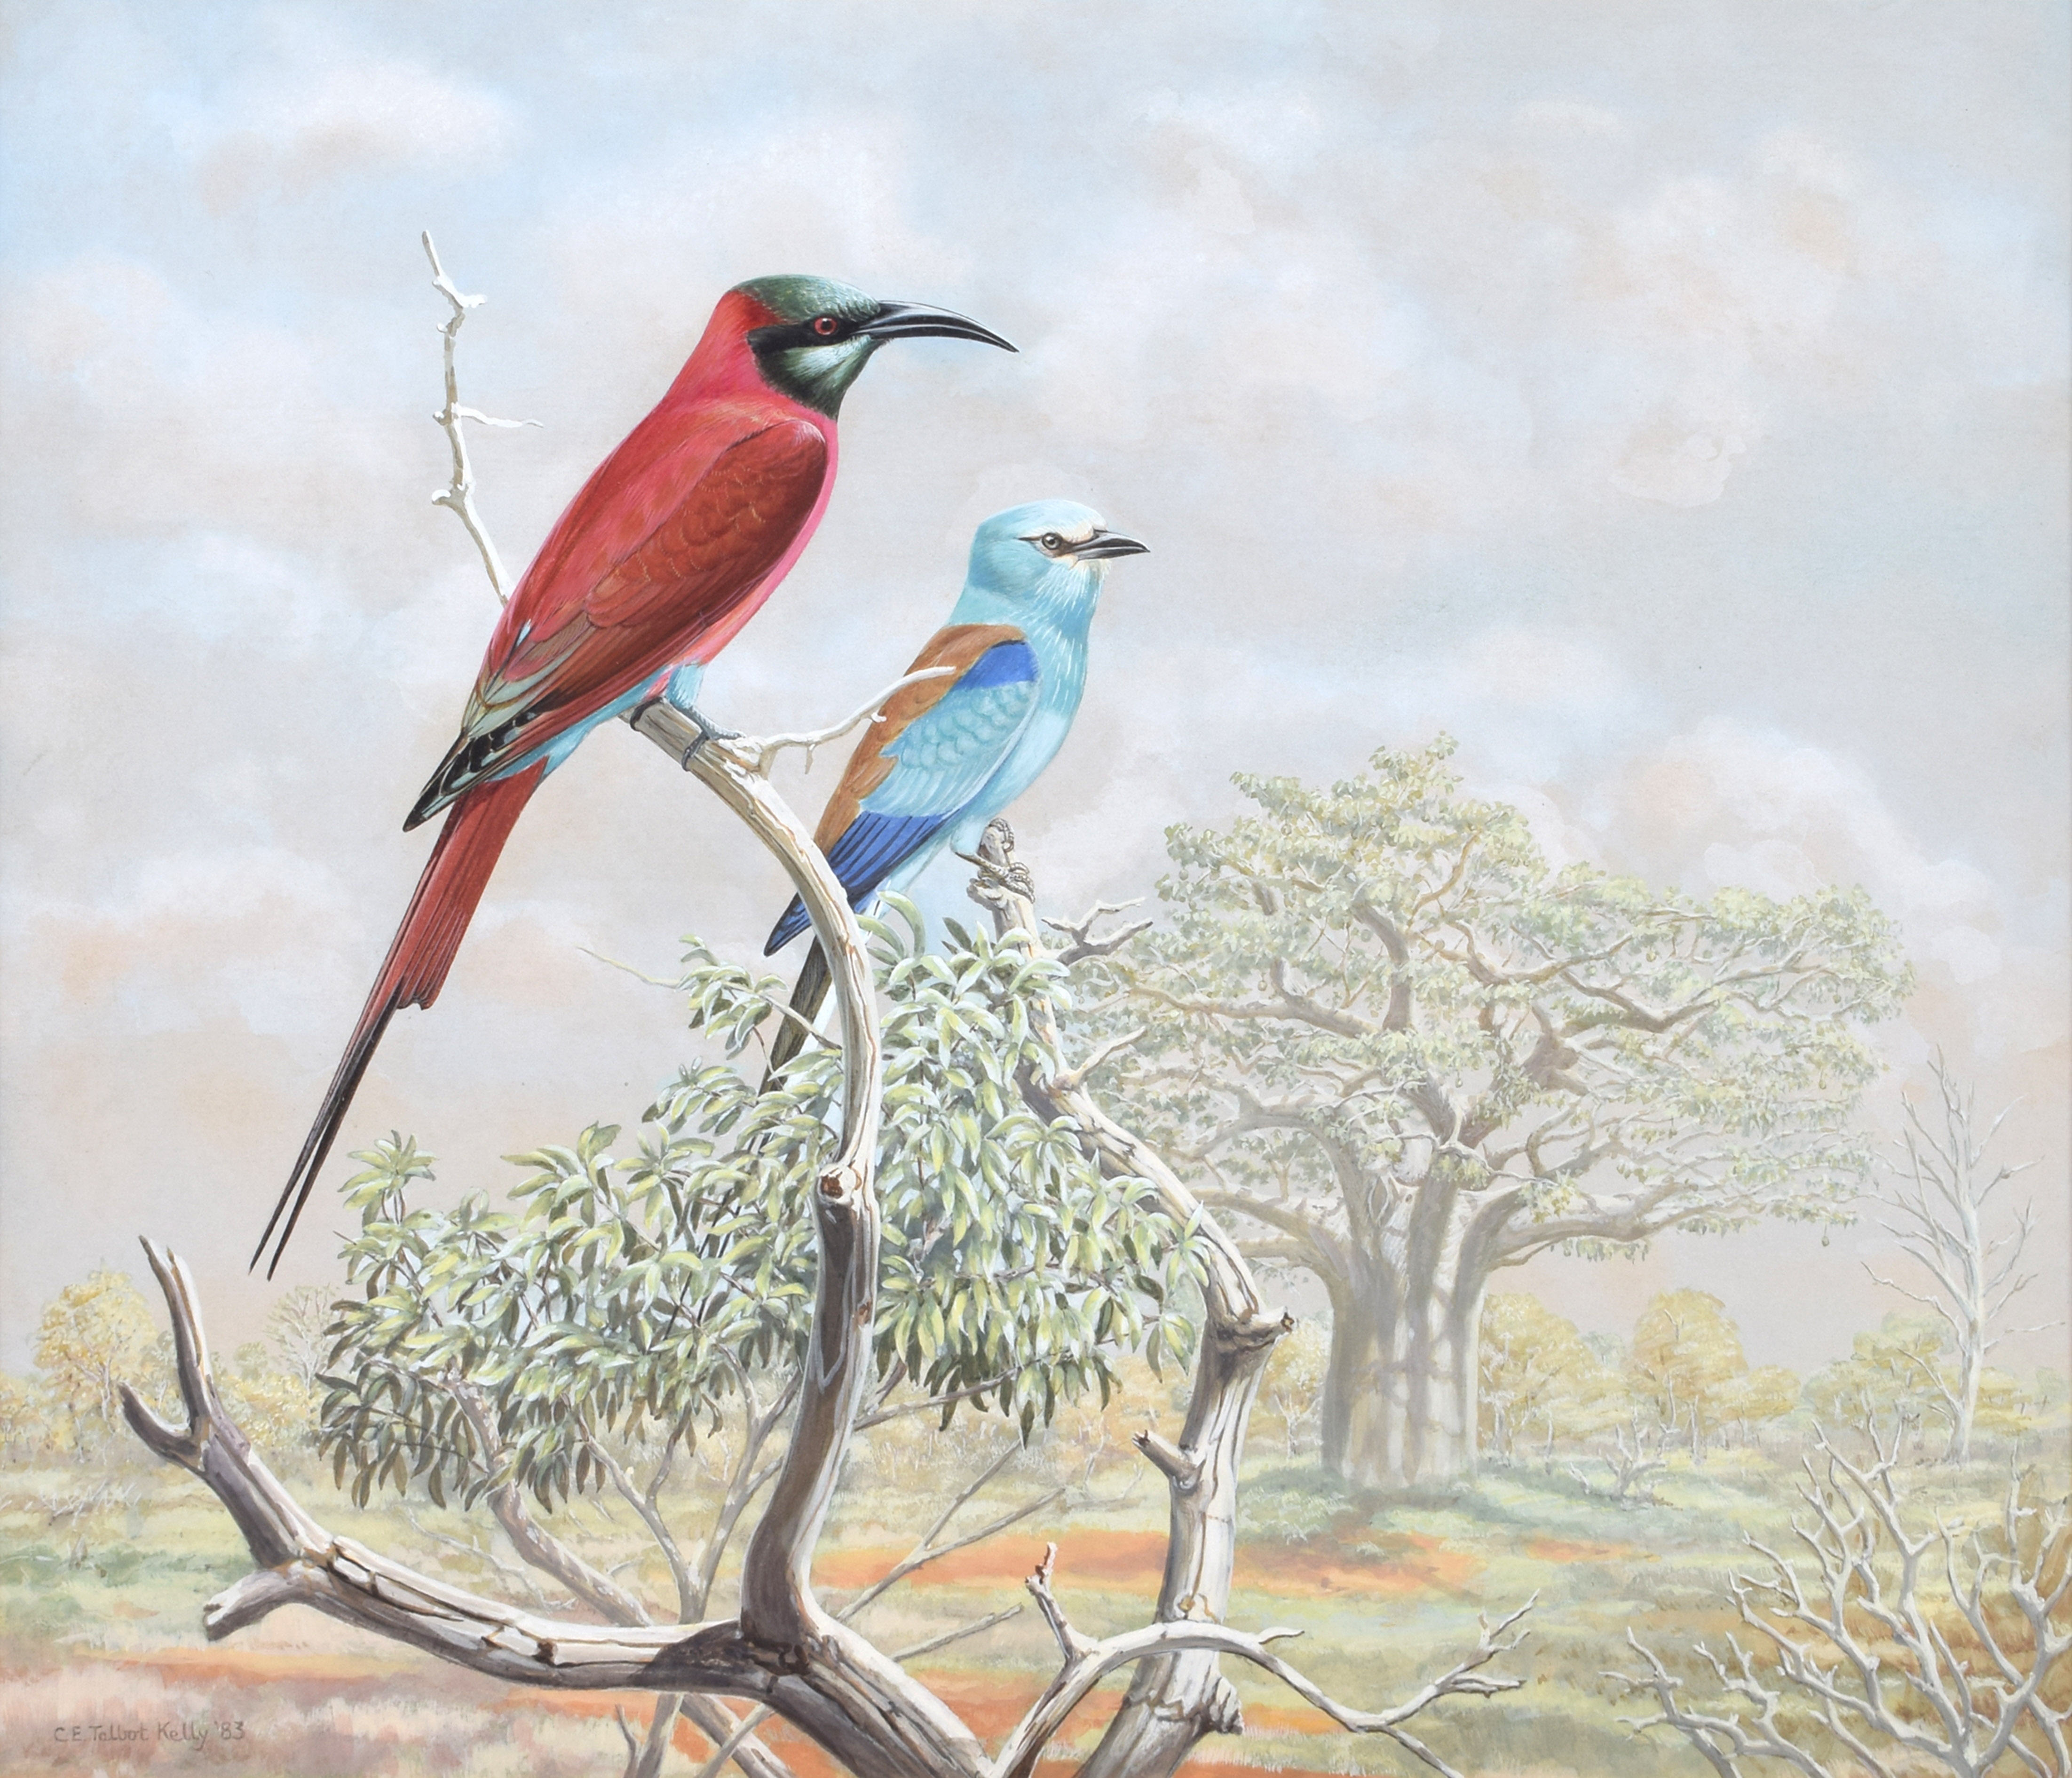 Bee-eater and Roller - Chloë Talbot-Kelly